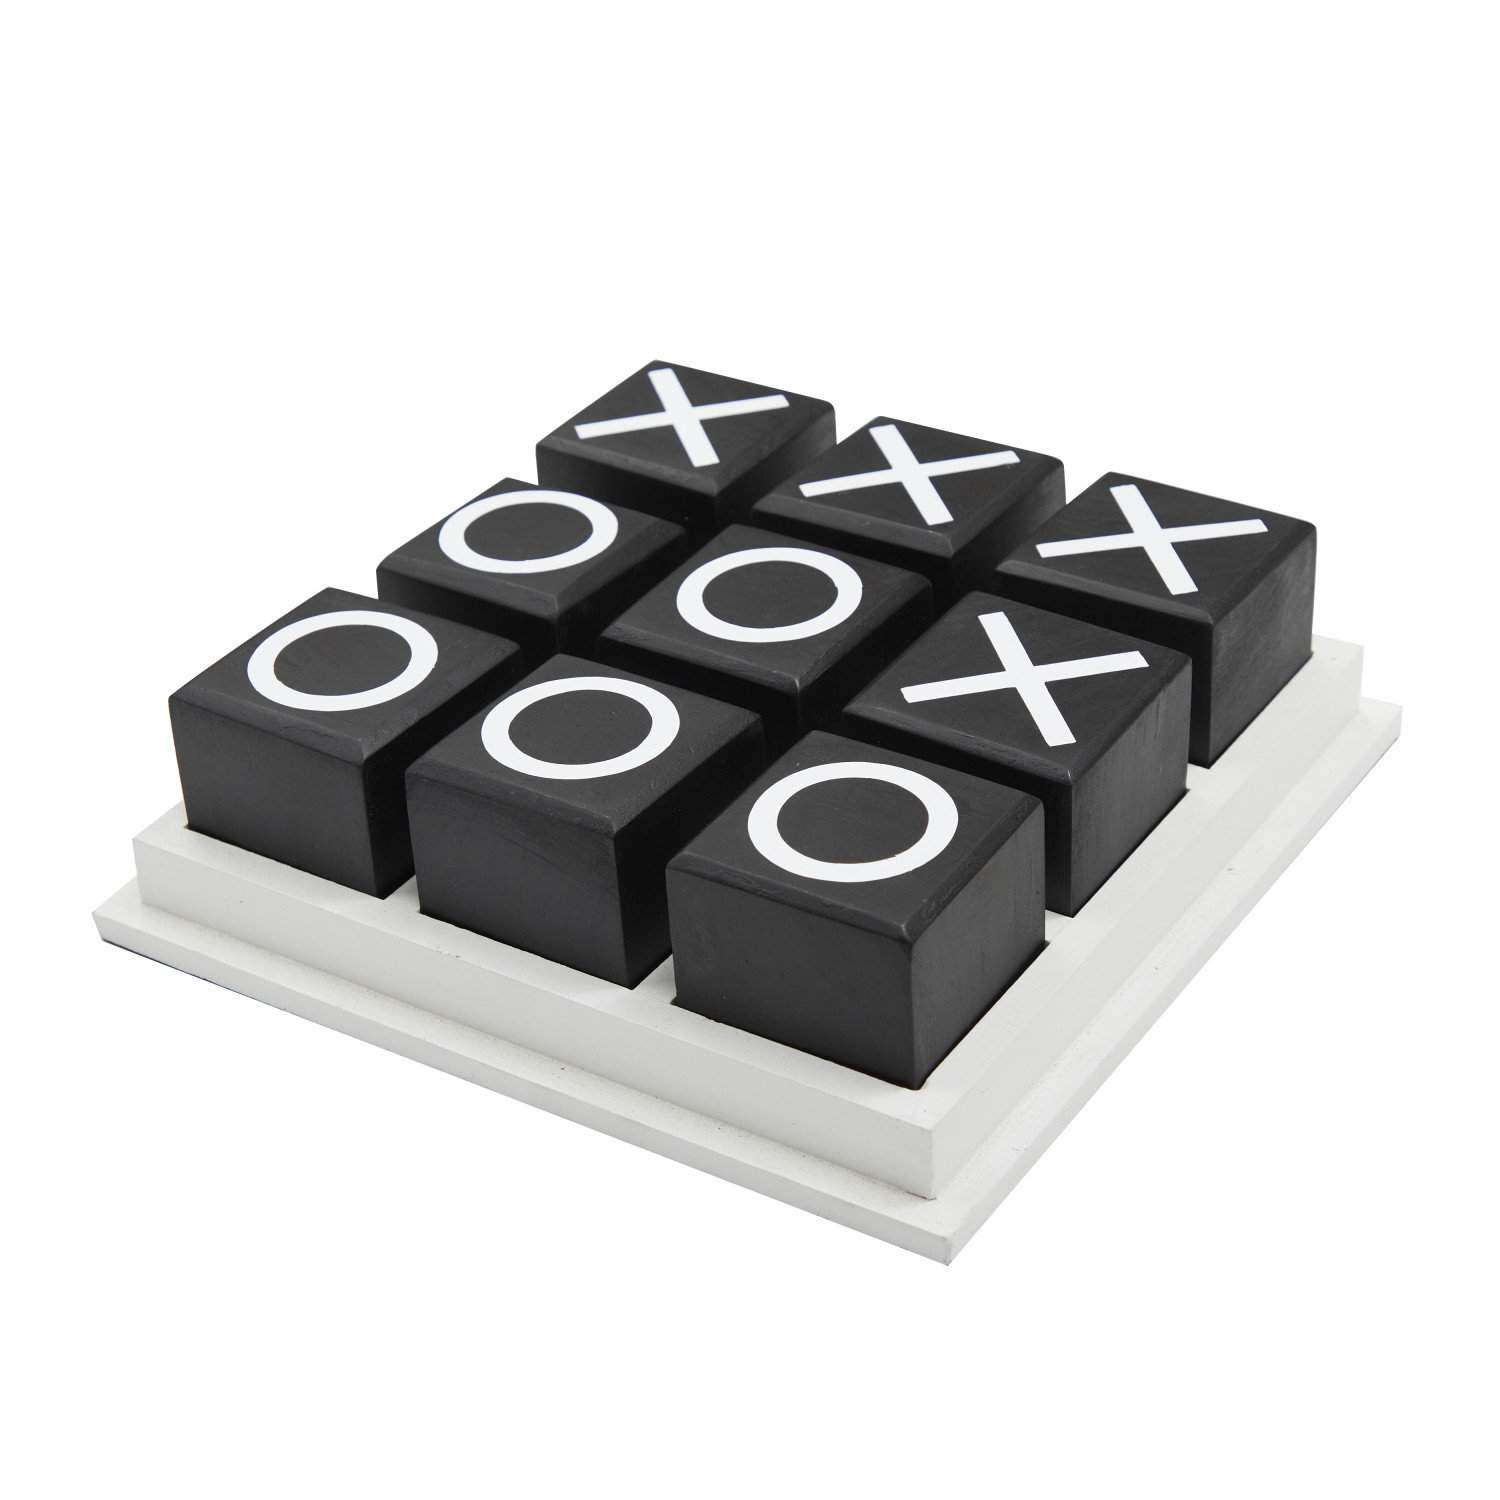 Mosaic Tic Tac Toe - get 3 or 4 in a row - with base & cover